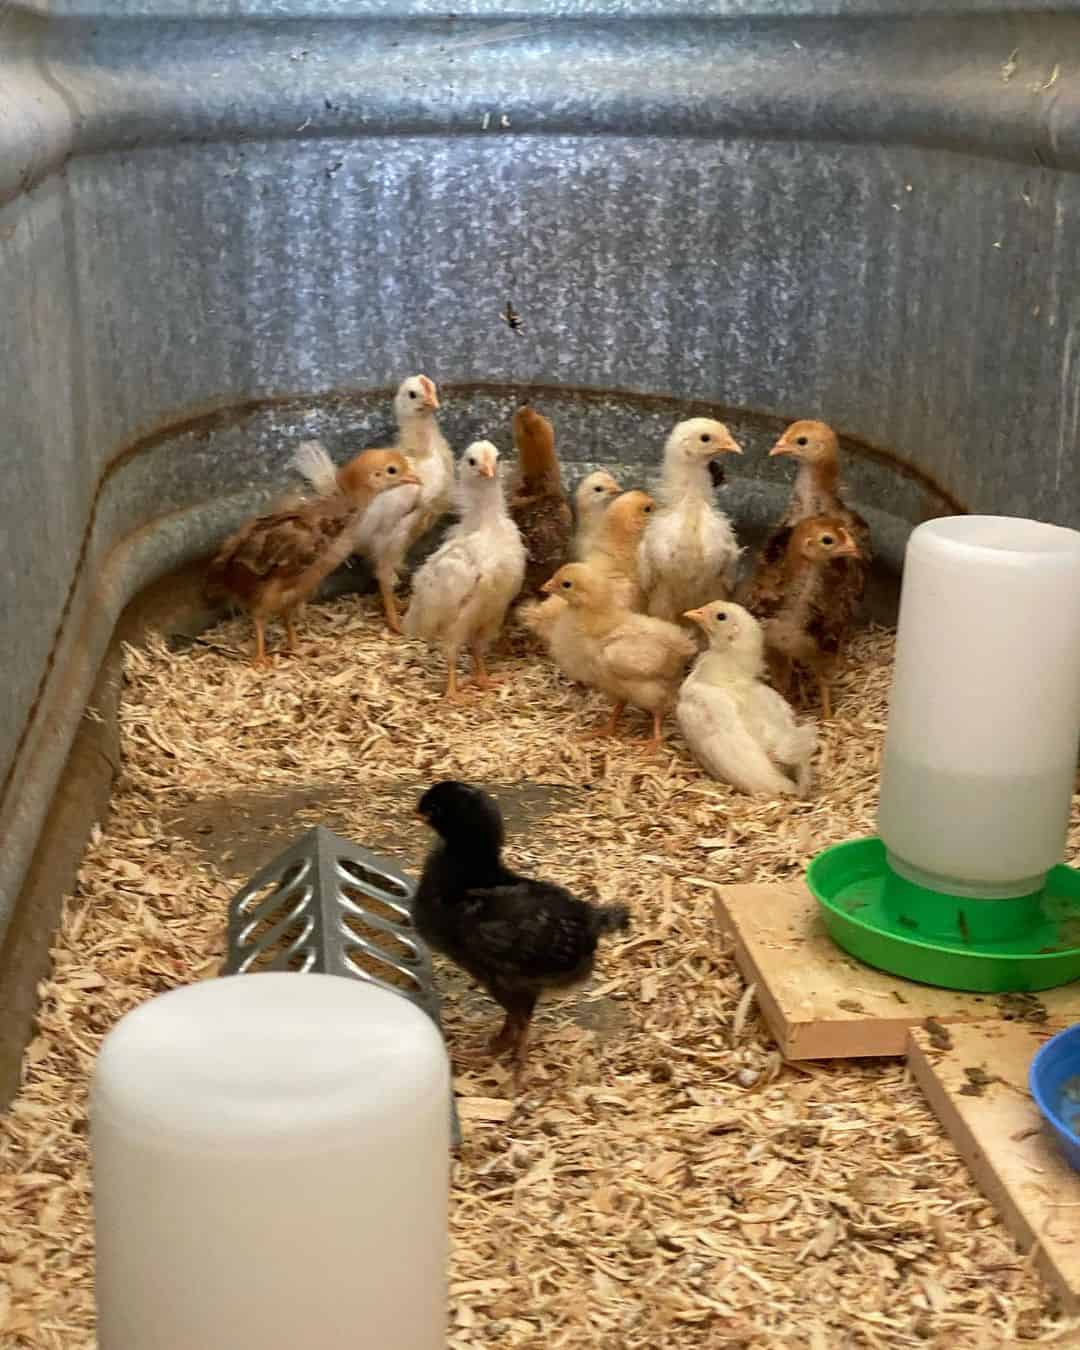 How to Identify Healthy Chicks Before Purchase?